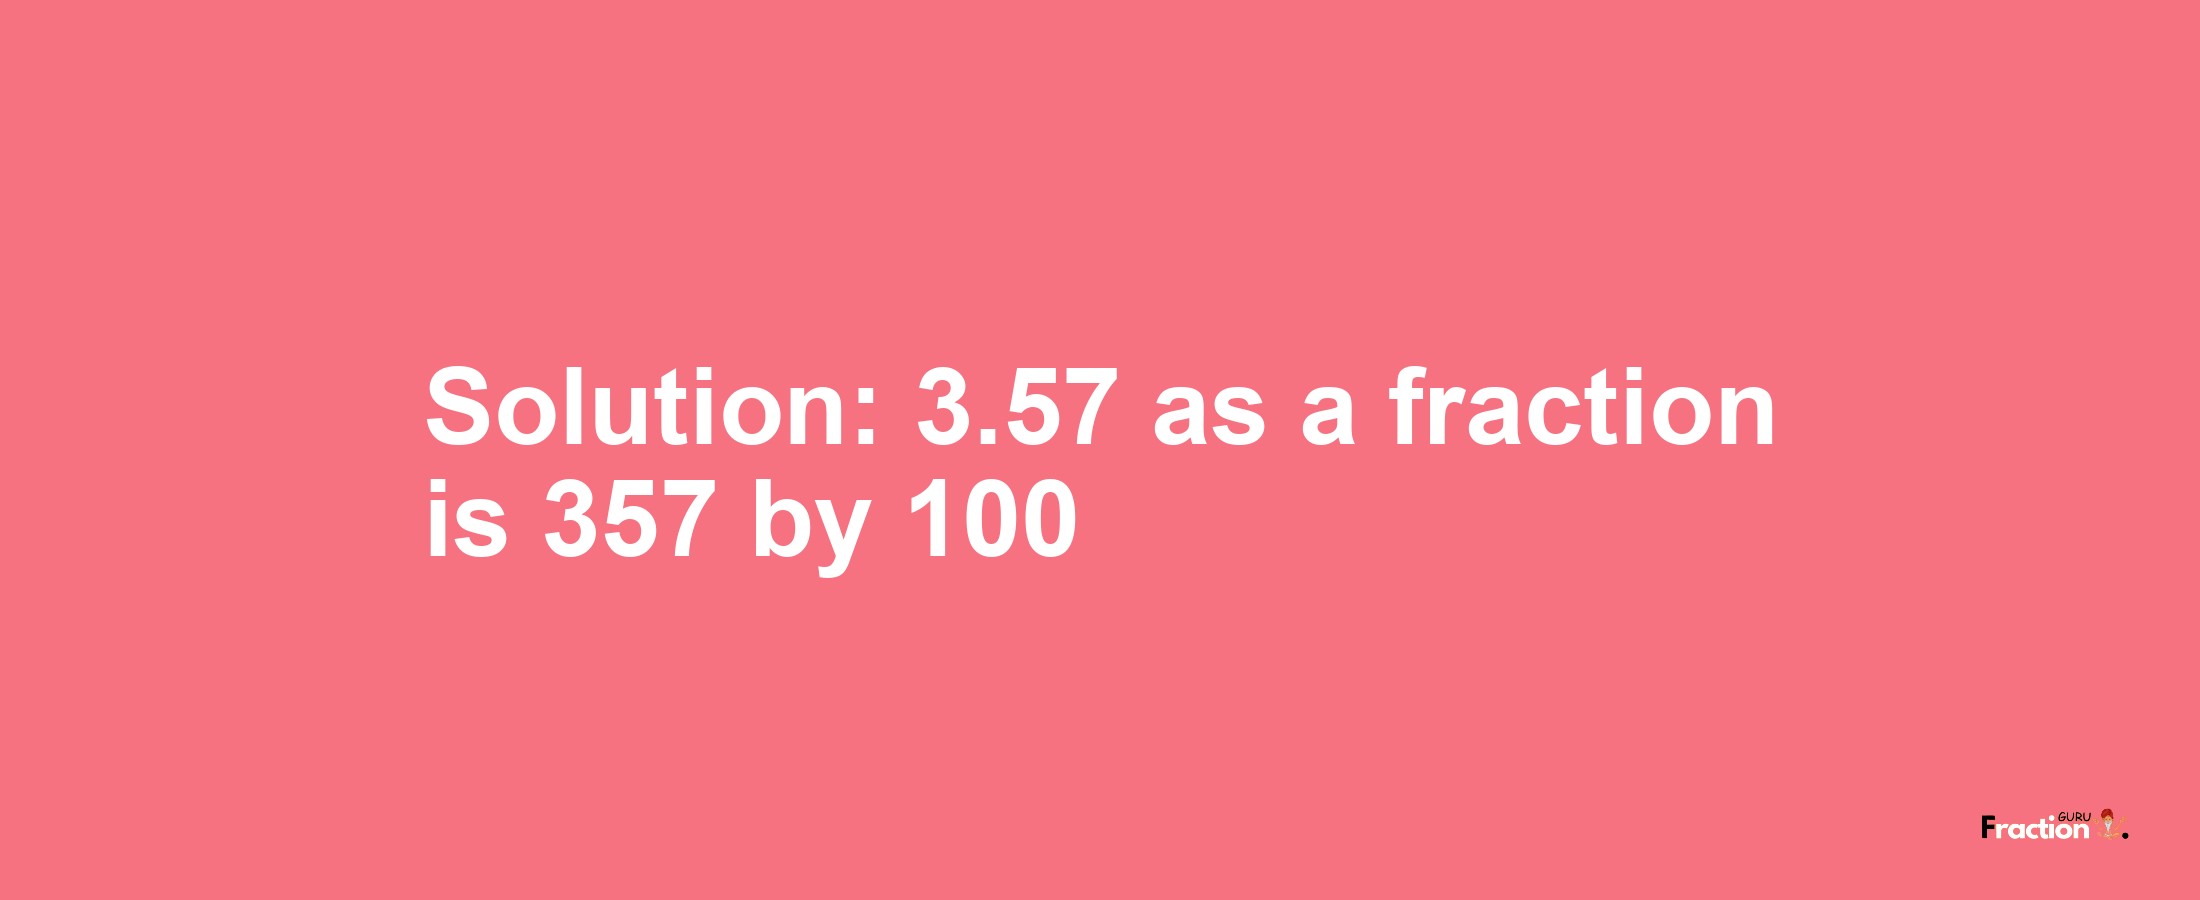 Solution:3.57 as a fraction is 357/100